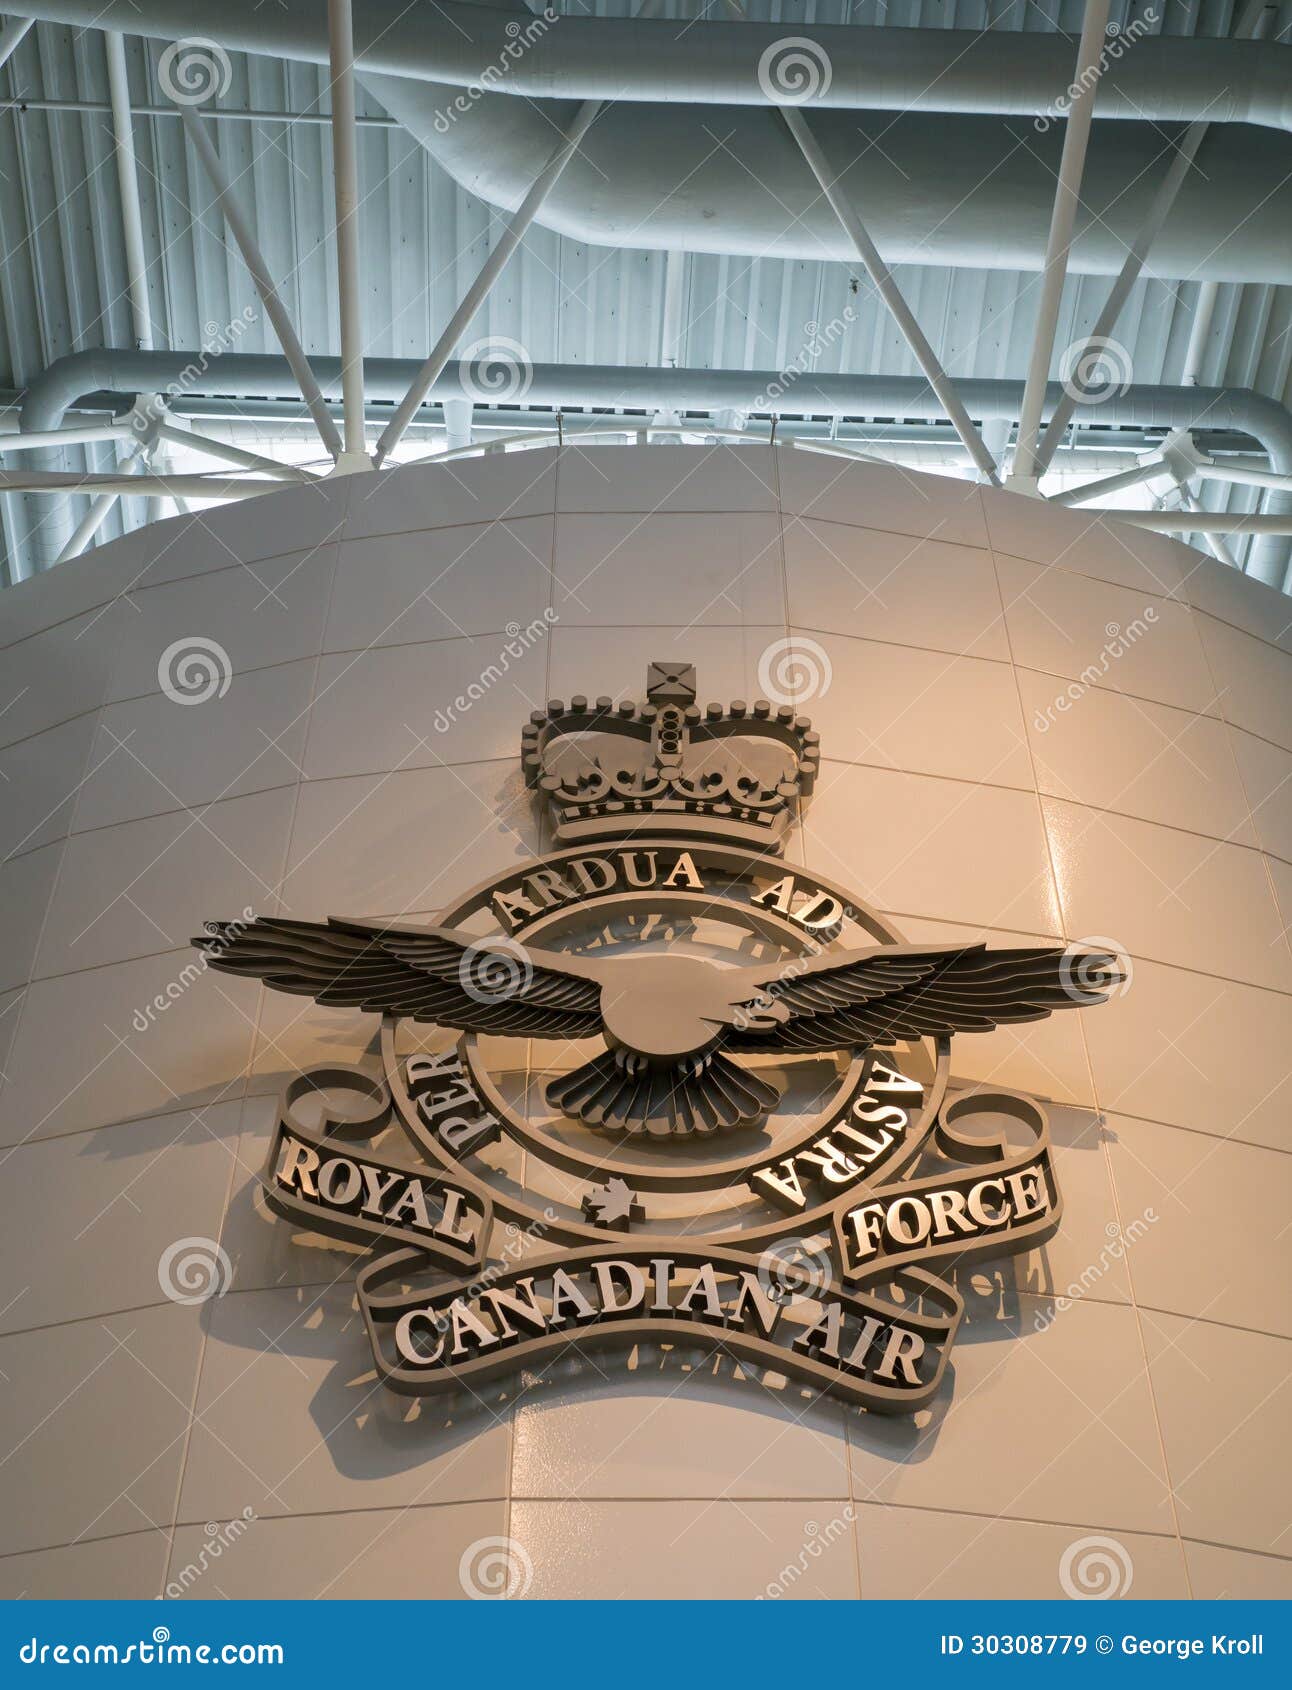 Royal Canadian Air Force Logo Editorial Stock Image - Image of icon, space: 303087791139 x 1300